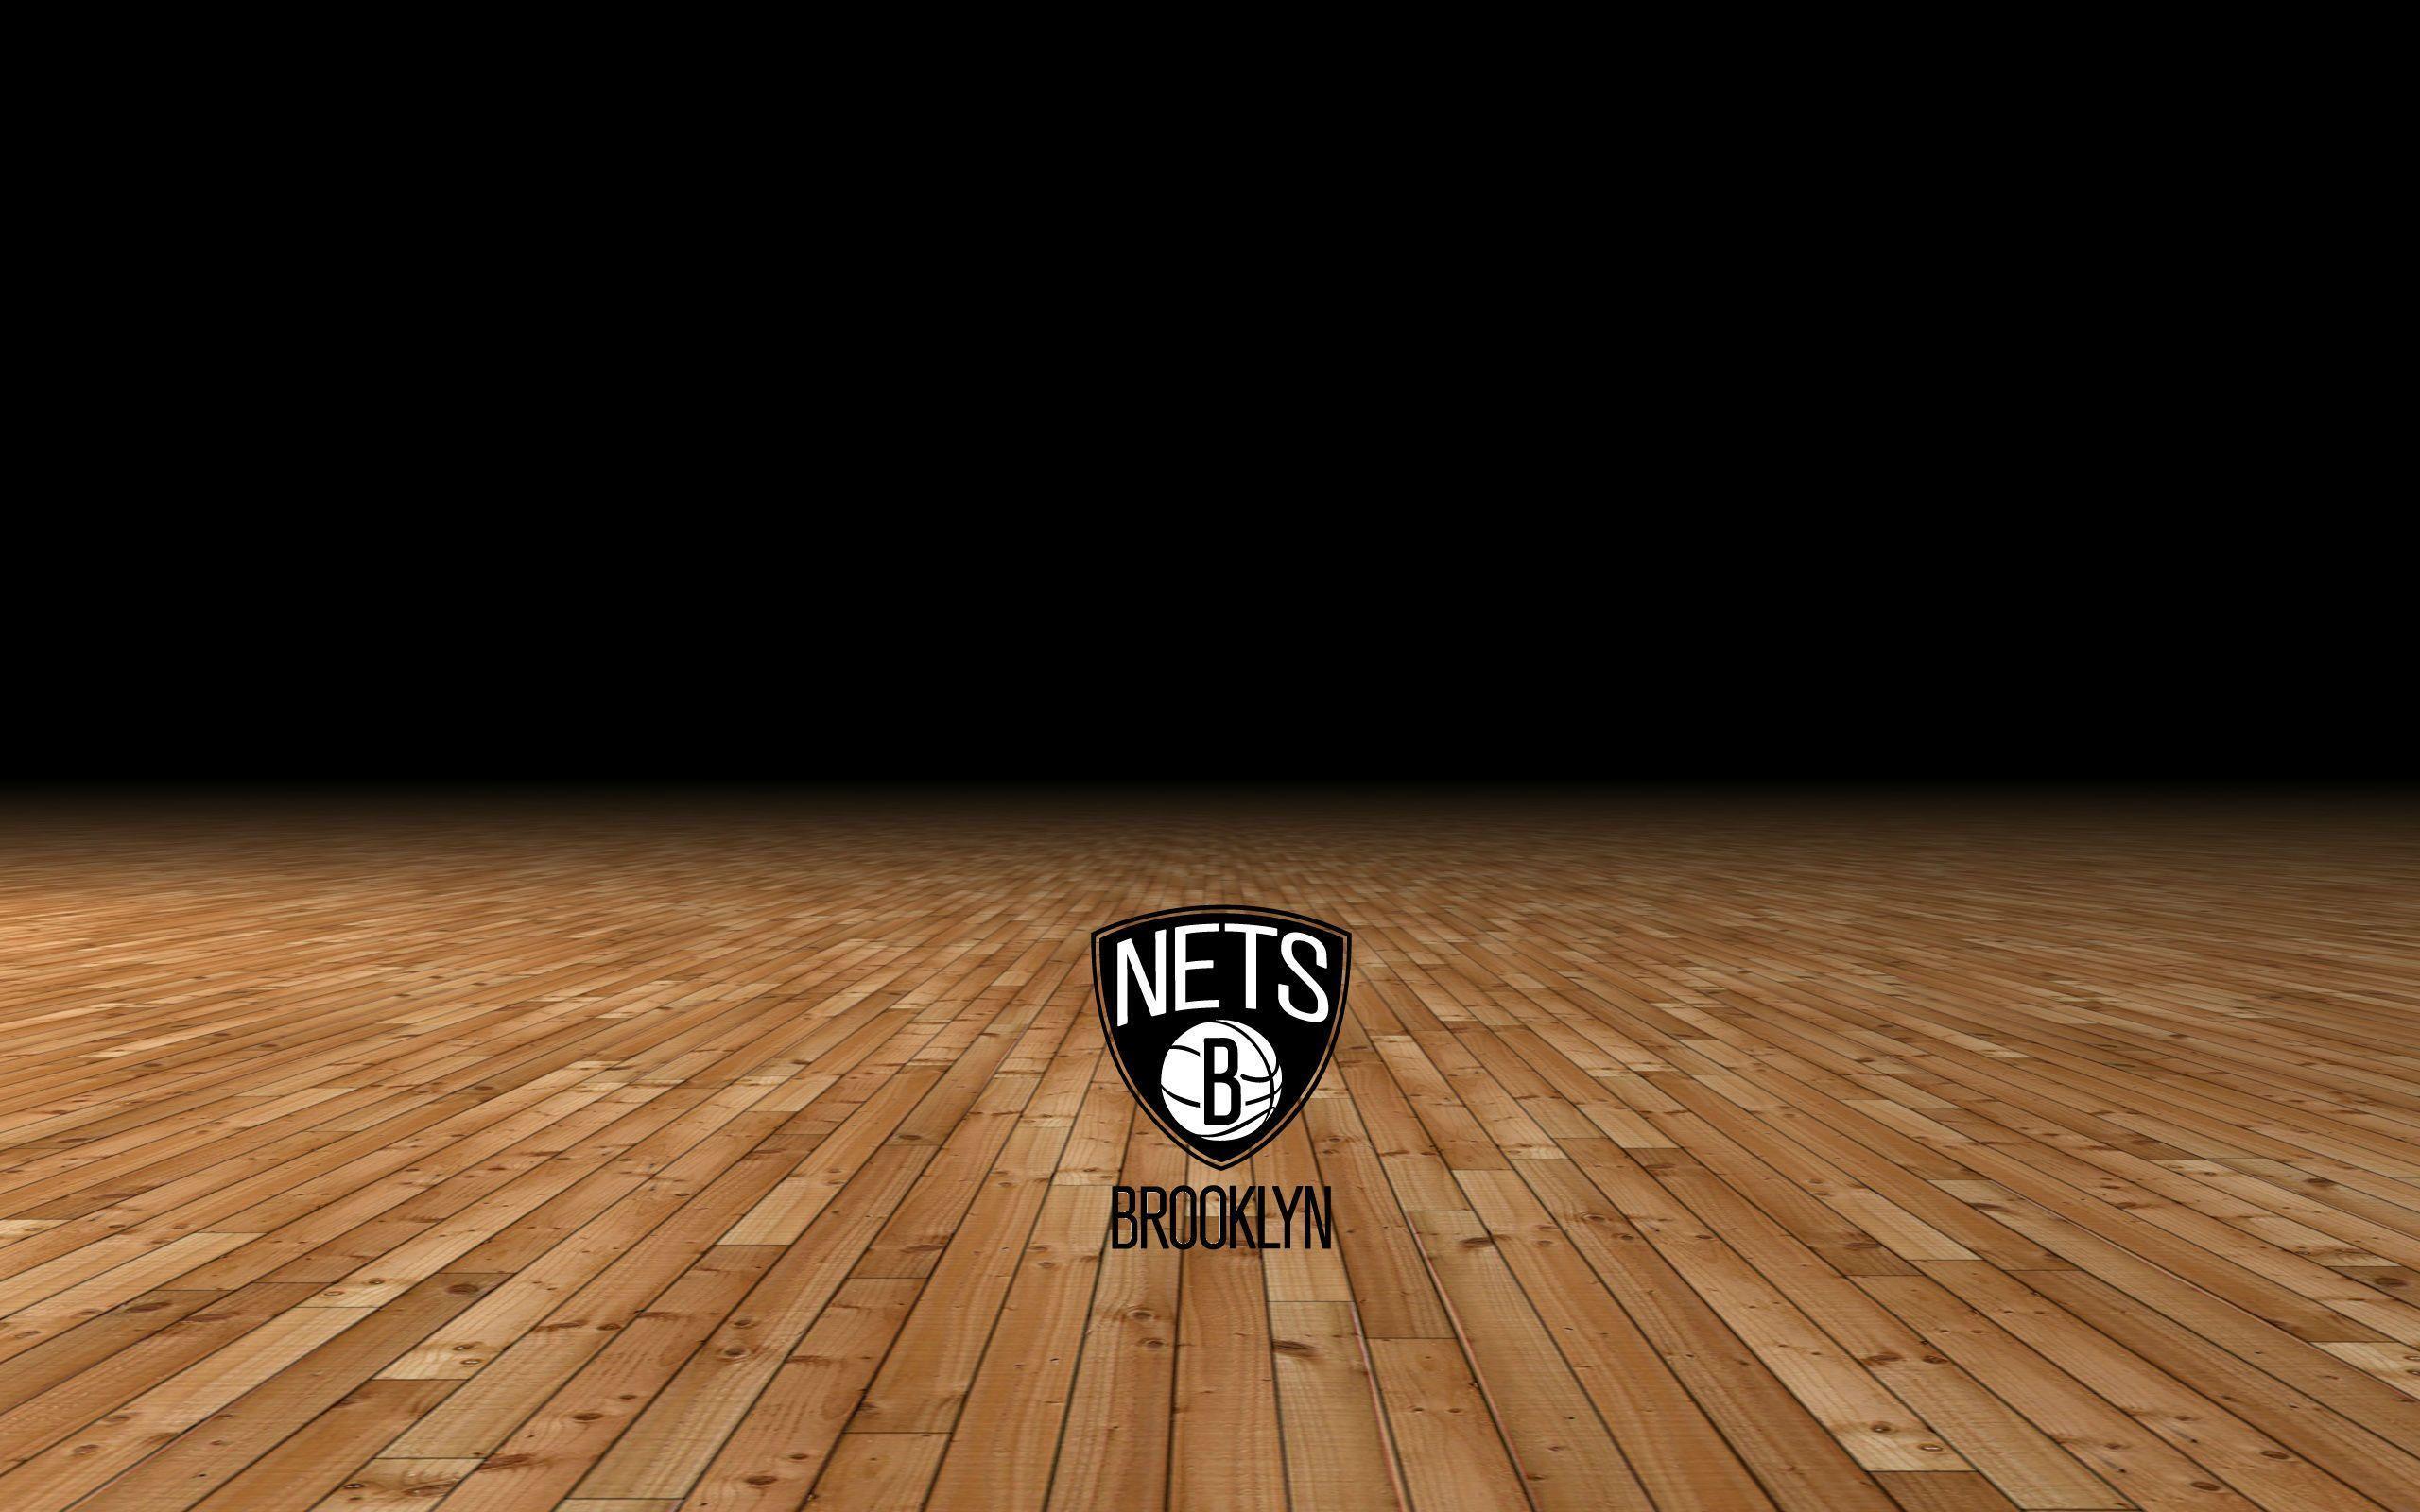 Brooklyn Nets Wallpaper Browse Brooklyn Nets Wallpaper with collections of  Android Basketball Brooklyn Nets  Brooklyn nets Basketball wallpaper  Nba wallpapers